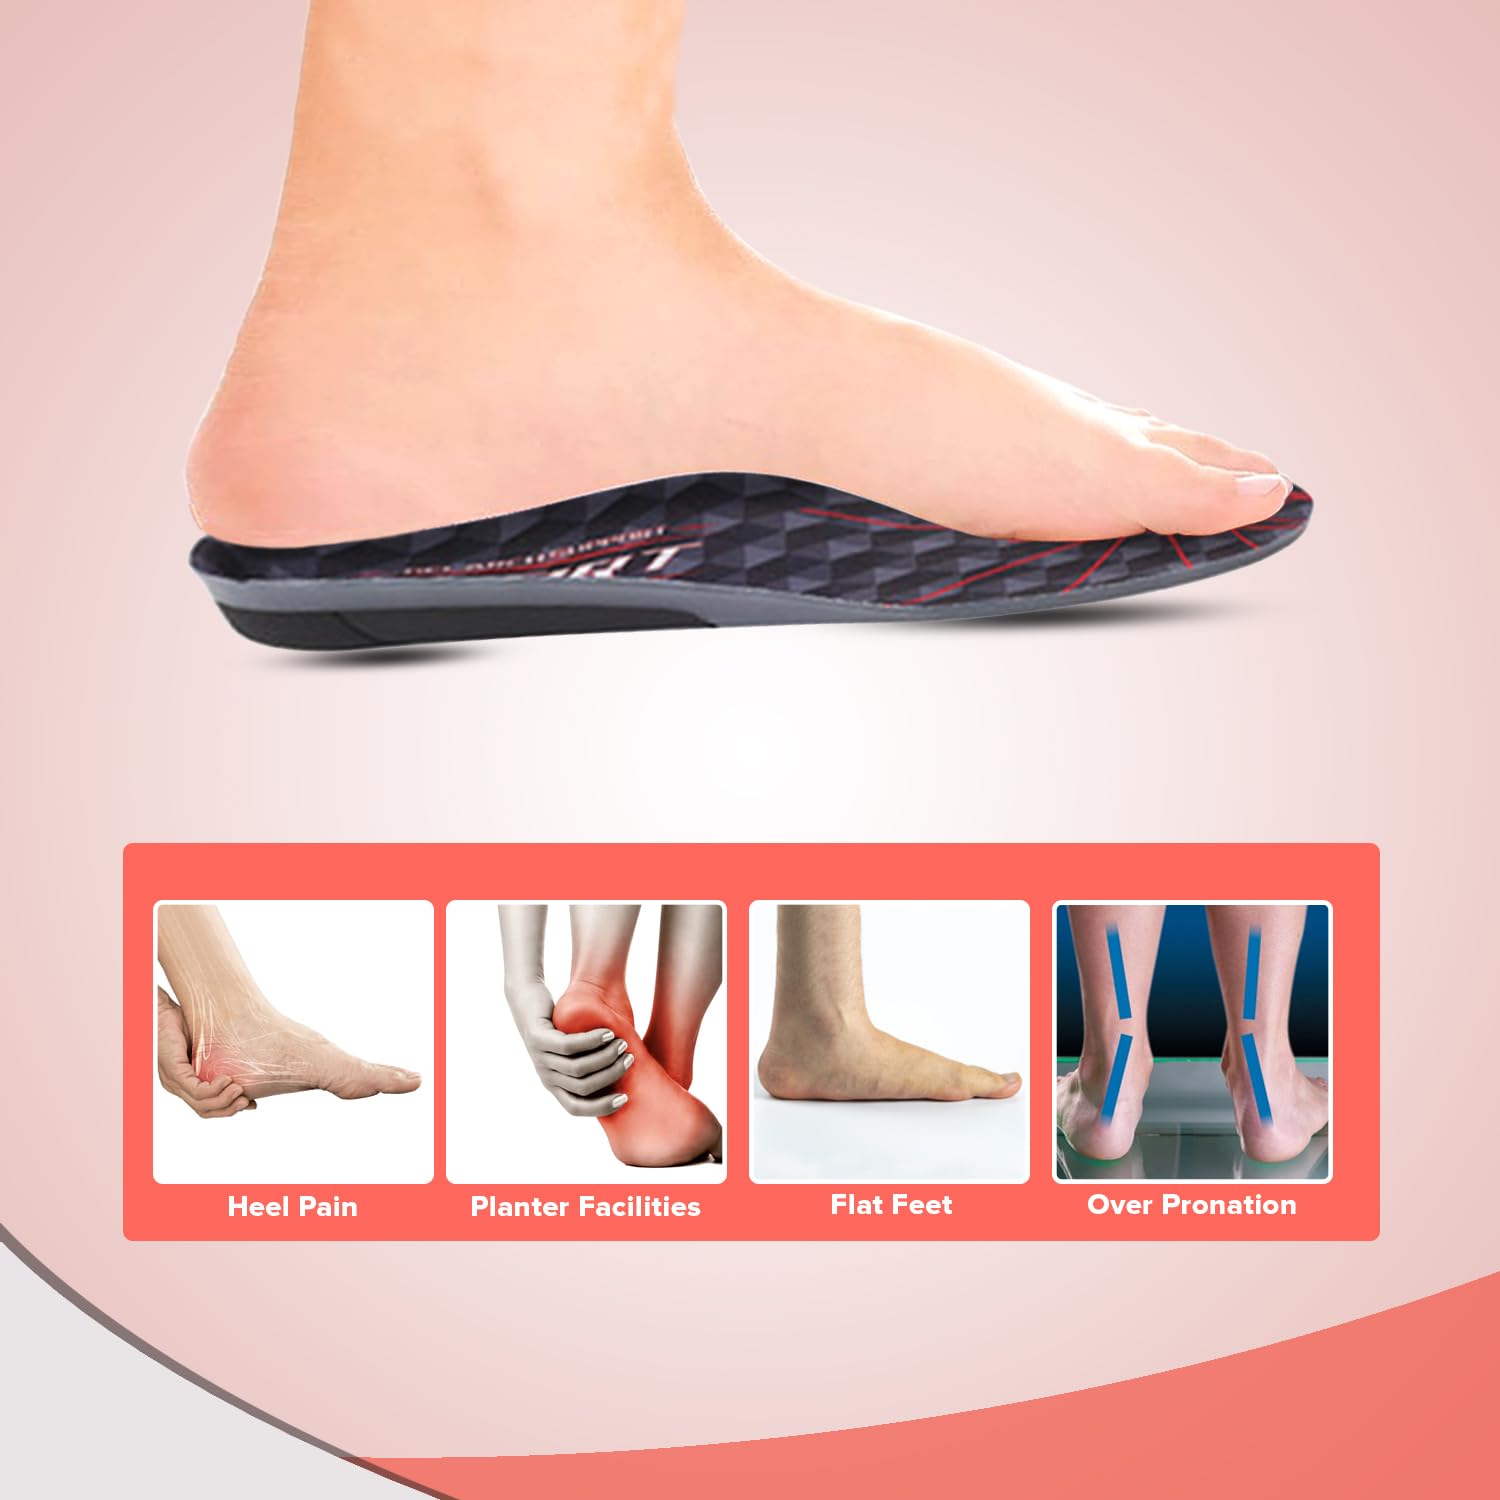 Dr Foot Orthotics for Sore Soles Insoles |For Comfortable Walking And Pressure Relief | Comfort and Support for Aching Feet |All Day Comfort | For Men & Women - 1 Pair - (Large Size)